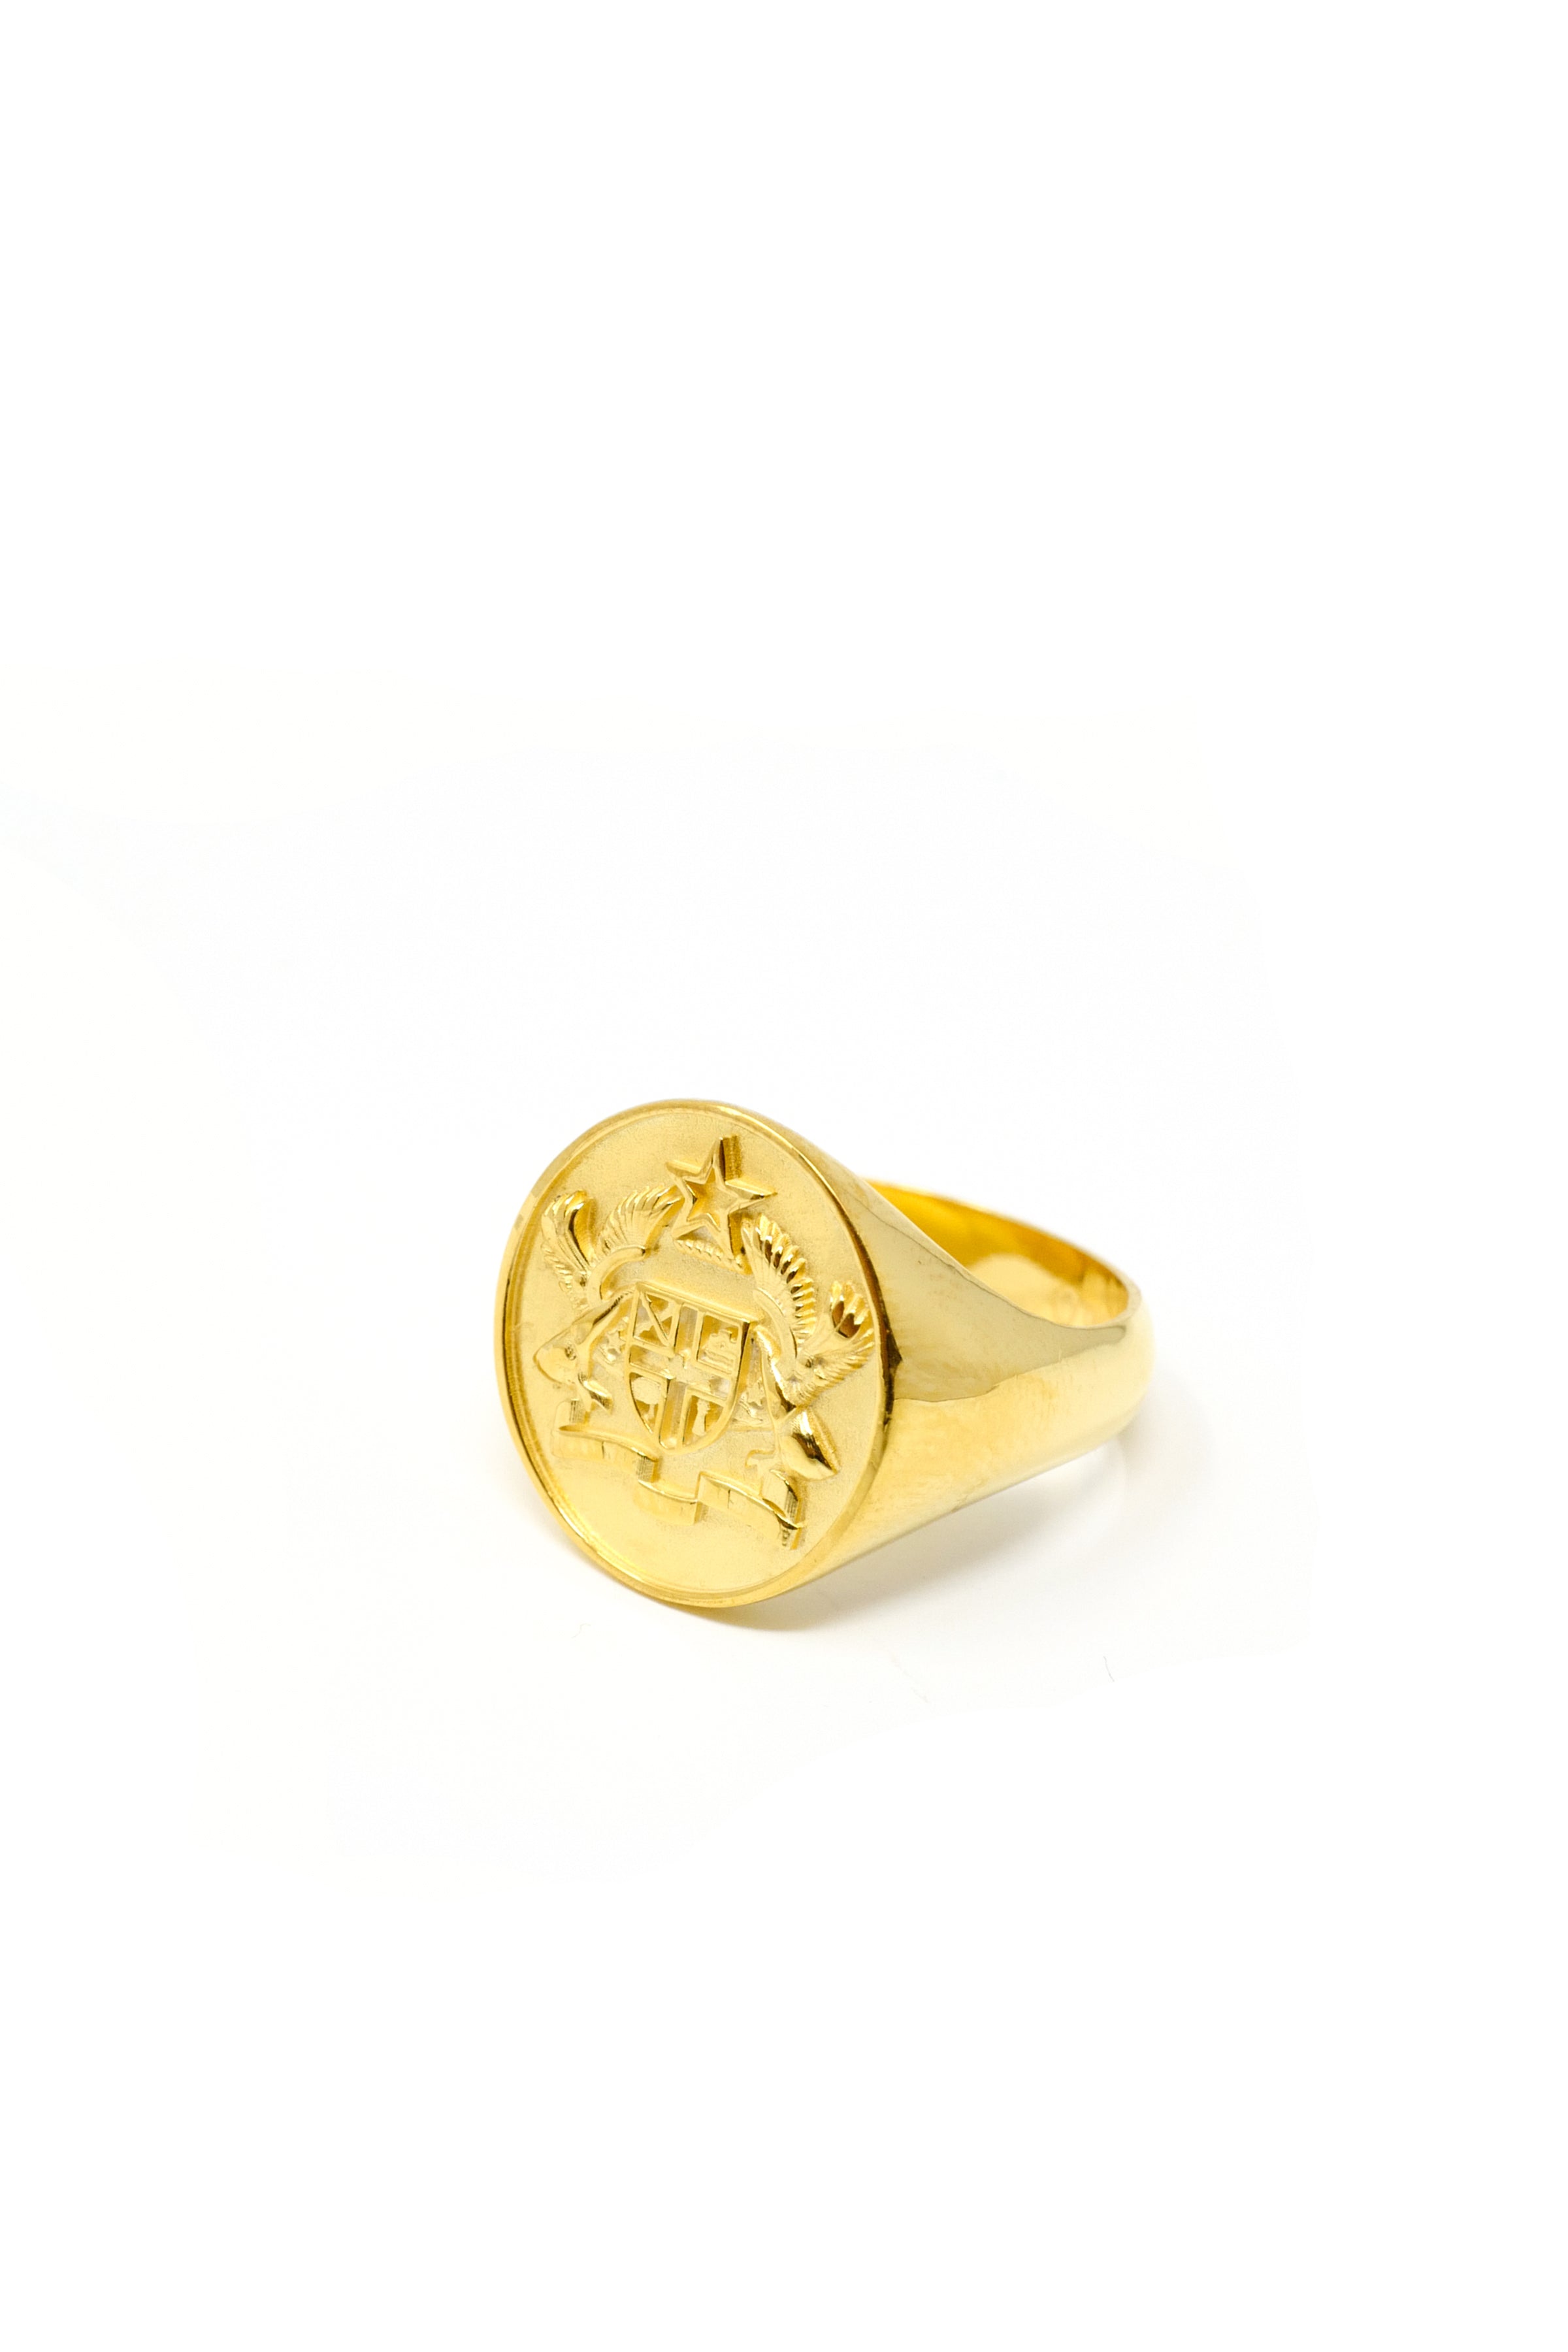 Jacquie Aiche - Thunderbird Crest Gold and Enamel Signet Ring - Gold